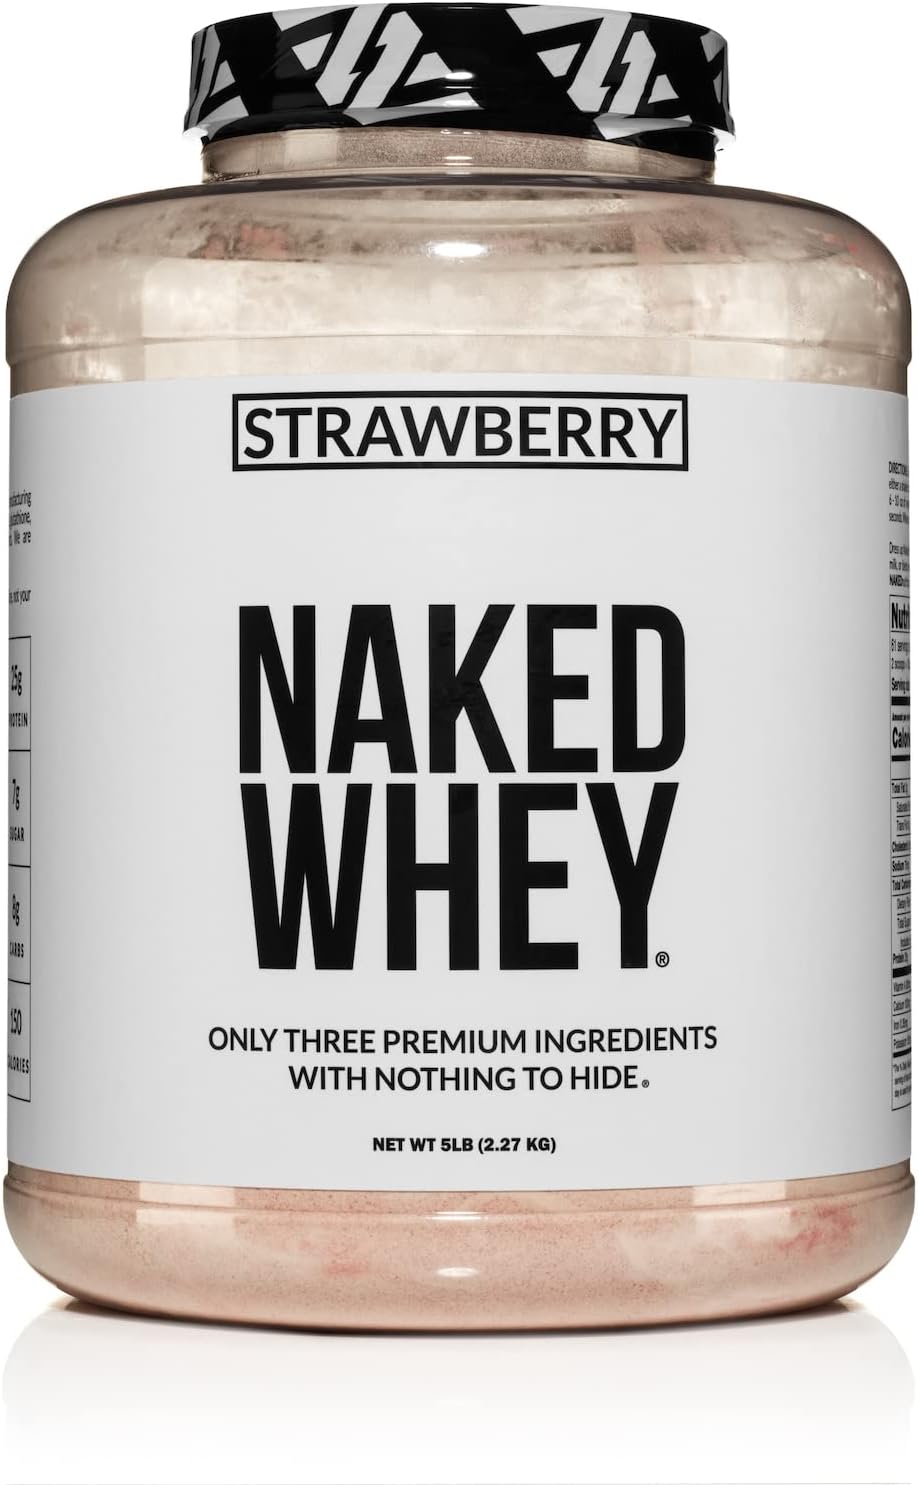 Strawberry Whey Protein - All Natural Grass Fed Whey Protein Powder + Dried Strawberries + Coconut Sugar- 5lb Bulk, GMO-Free, Soy Free, Gluten Free. Aid Muscle Growth & Recovery - 61 Servings